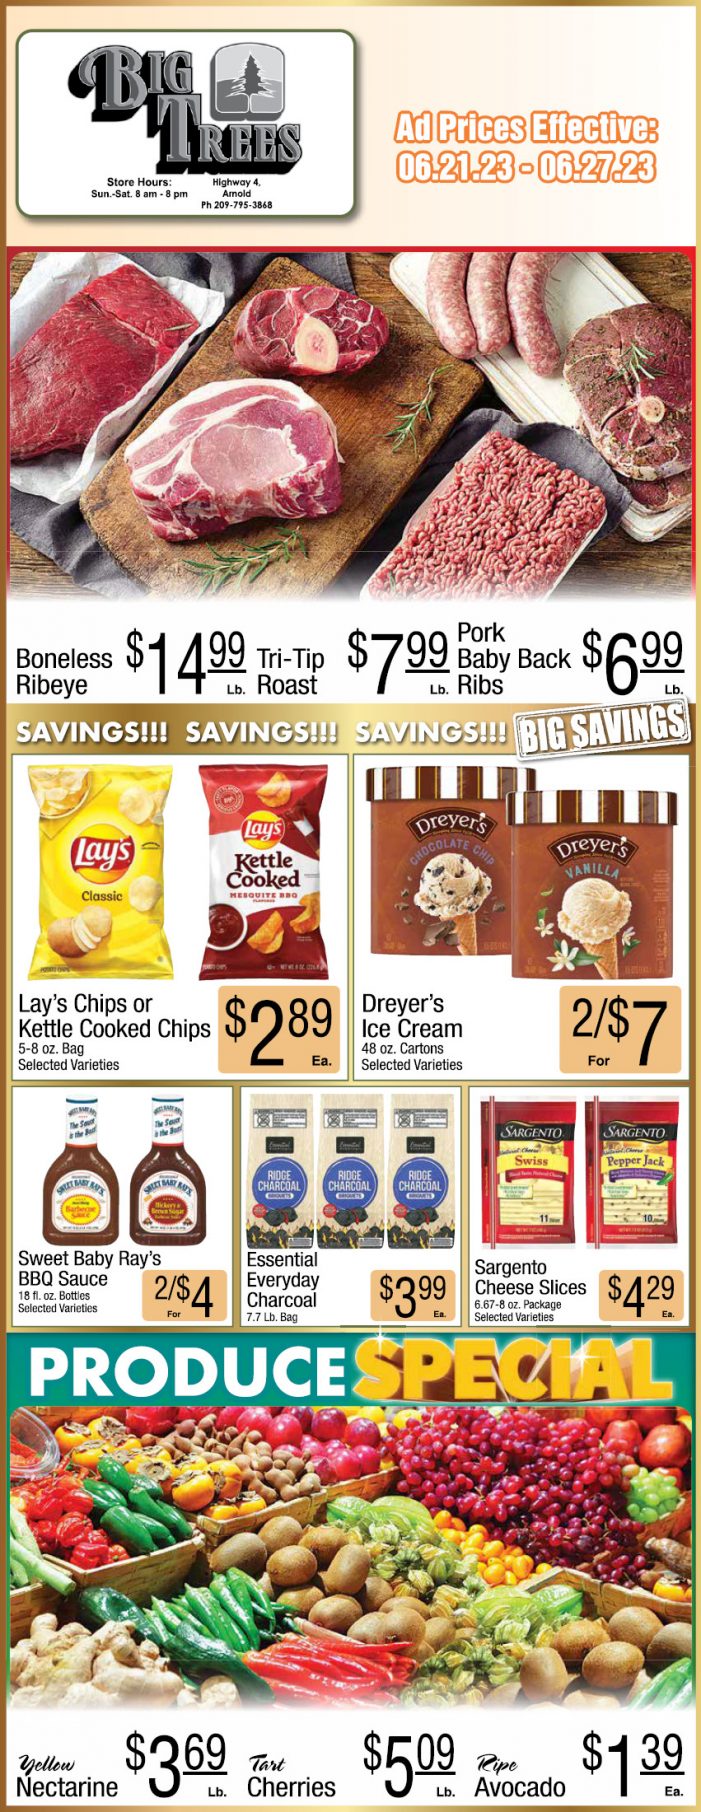 Big Trees Market Weekly Ad, Grocery, Produce, Meat & Deli Specials June 21 ~ 27!  Shop Local & Save!